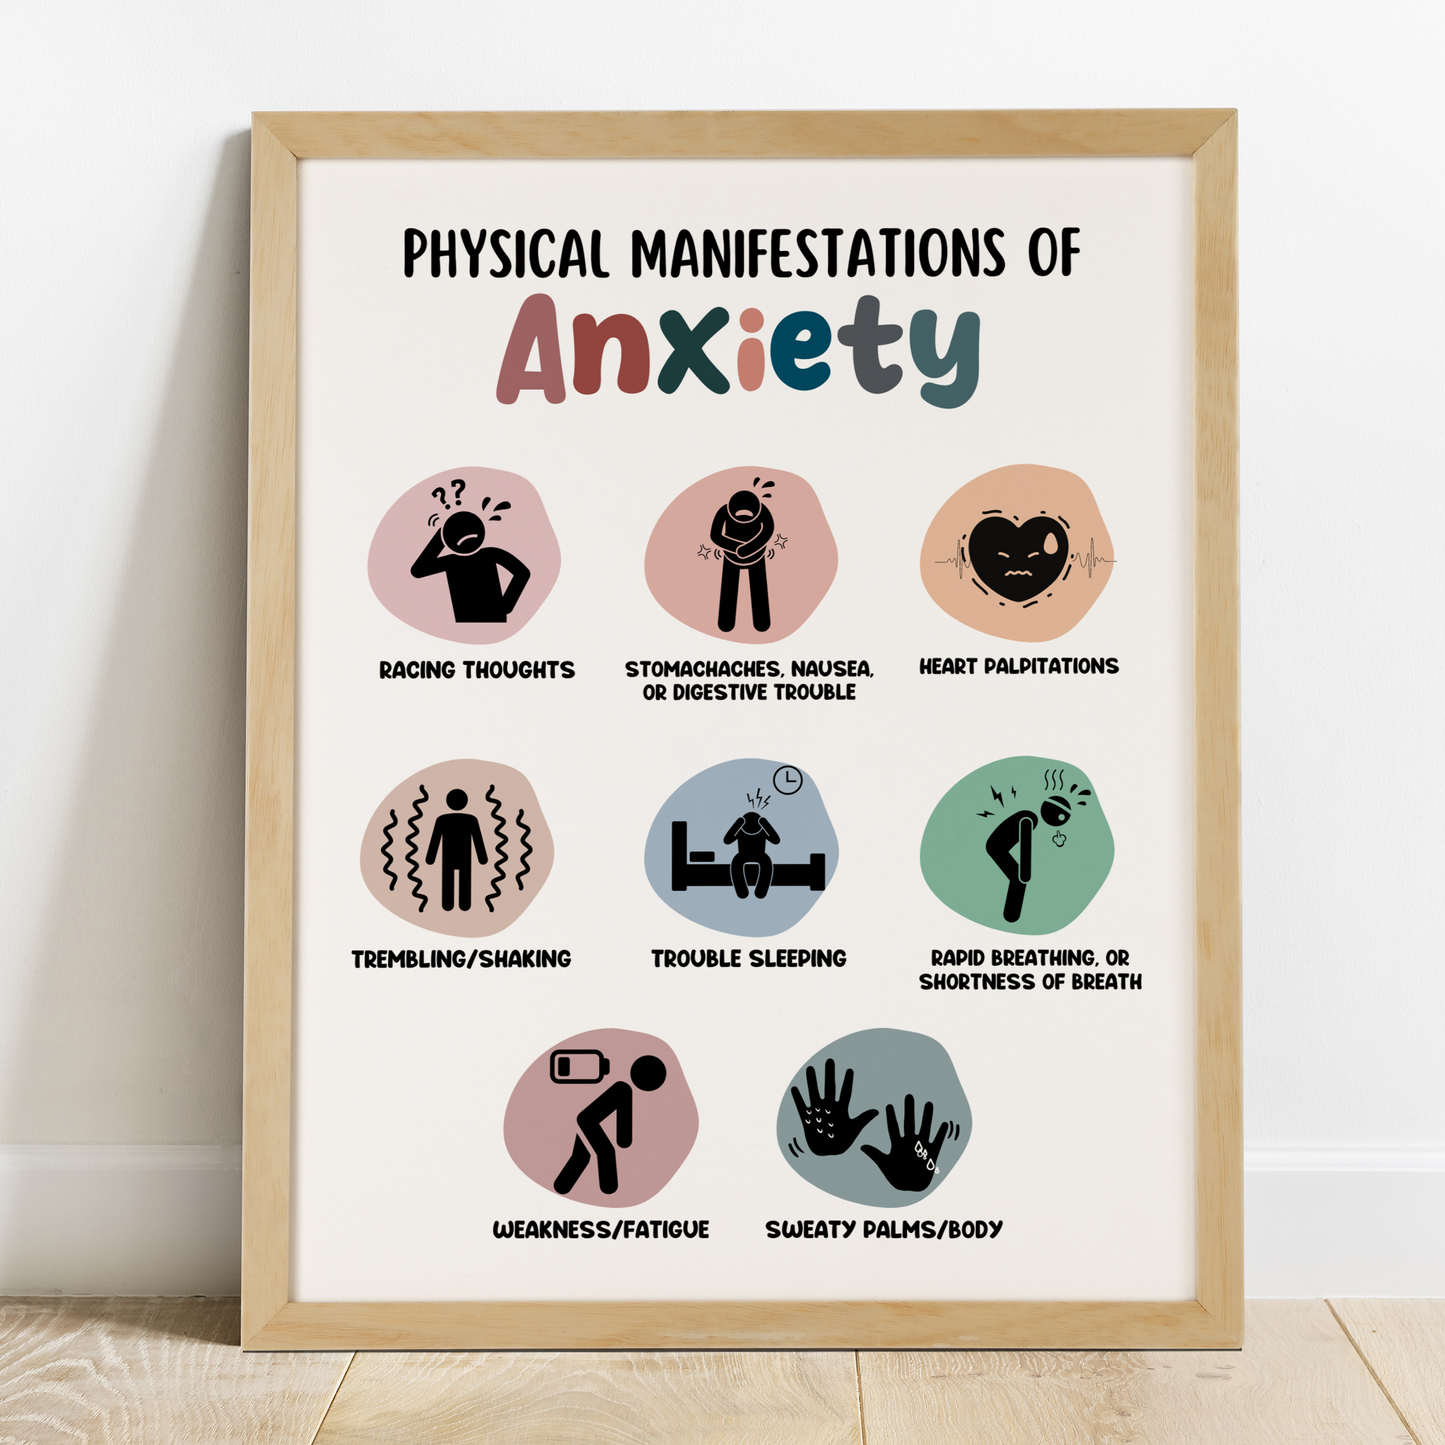 Physical Manifestations of Anxiety